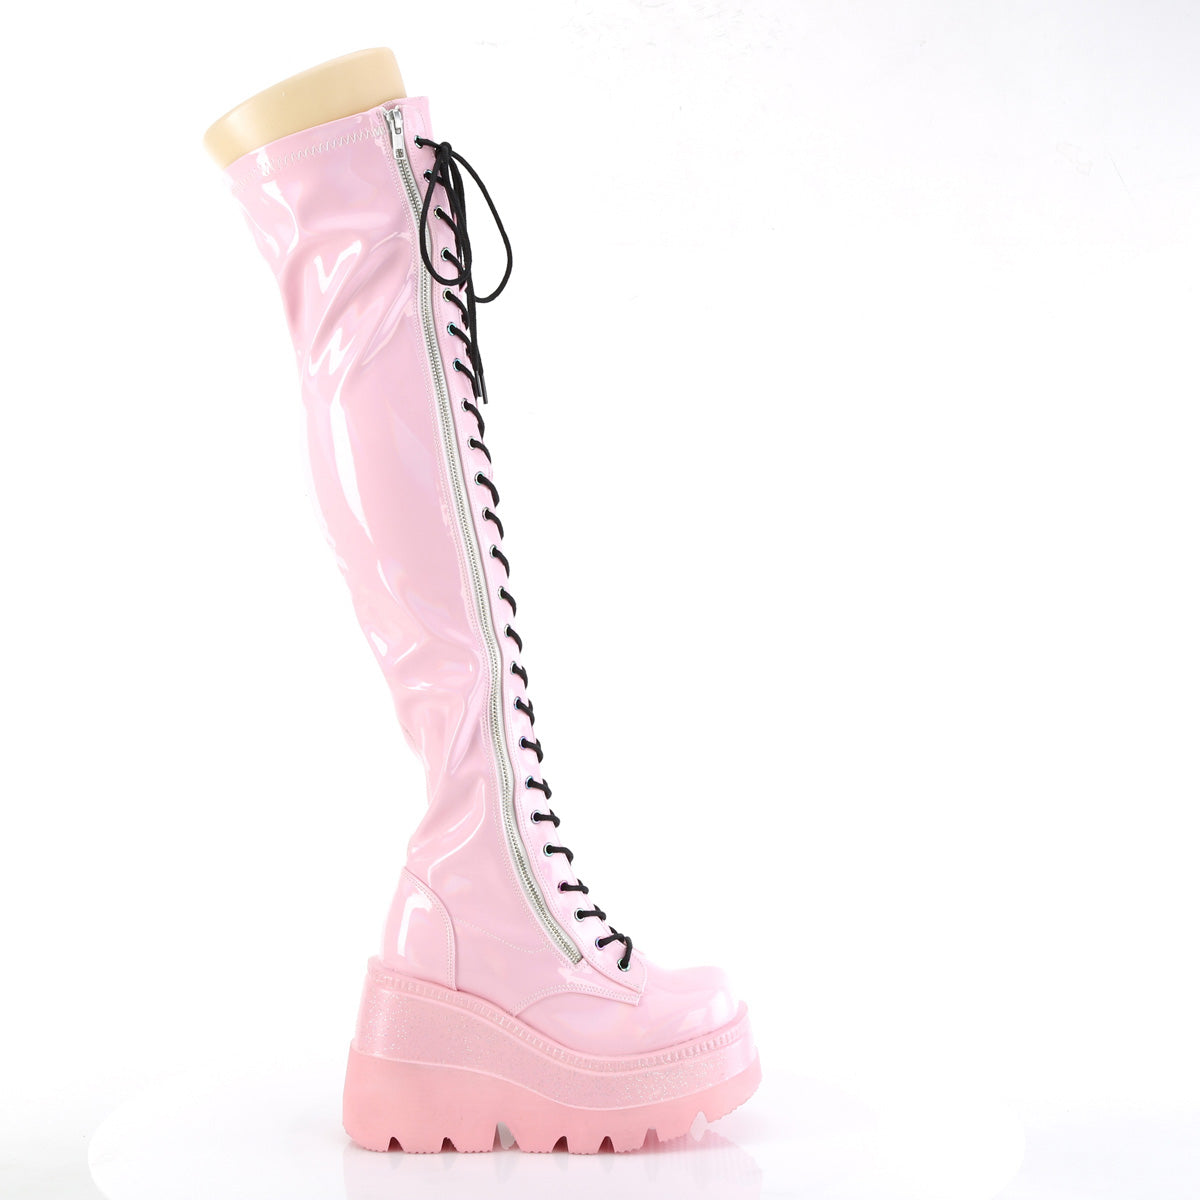 DemoniaCult Womens Boots SHAKER-374 B. Pink Hologram Stretch Patent